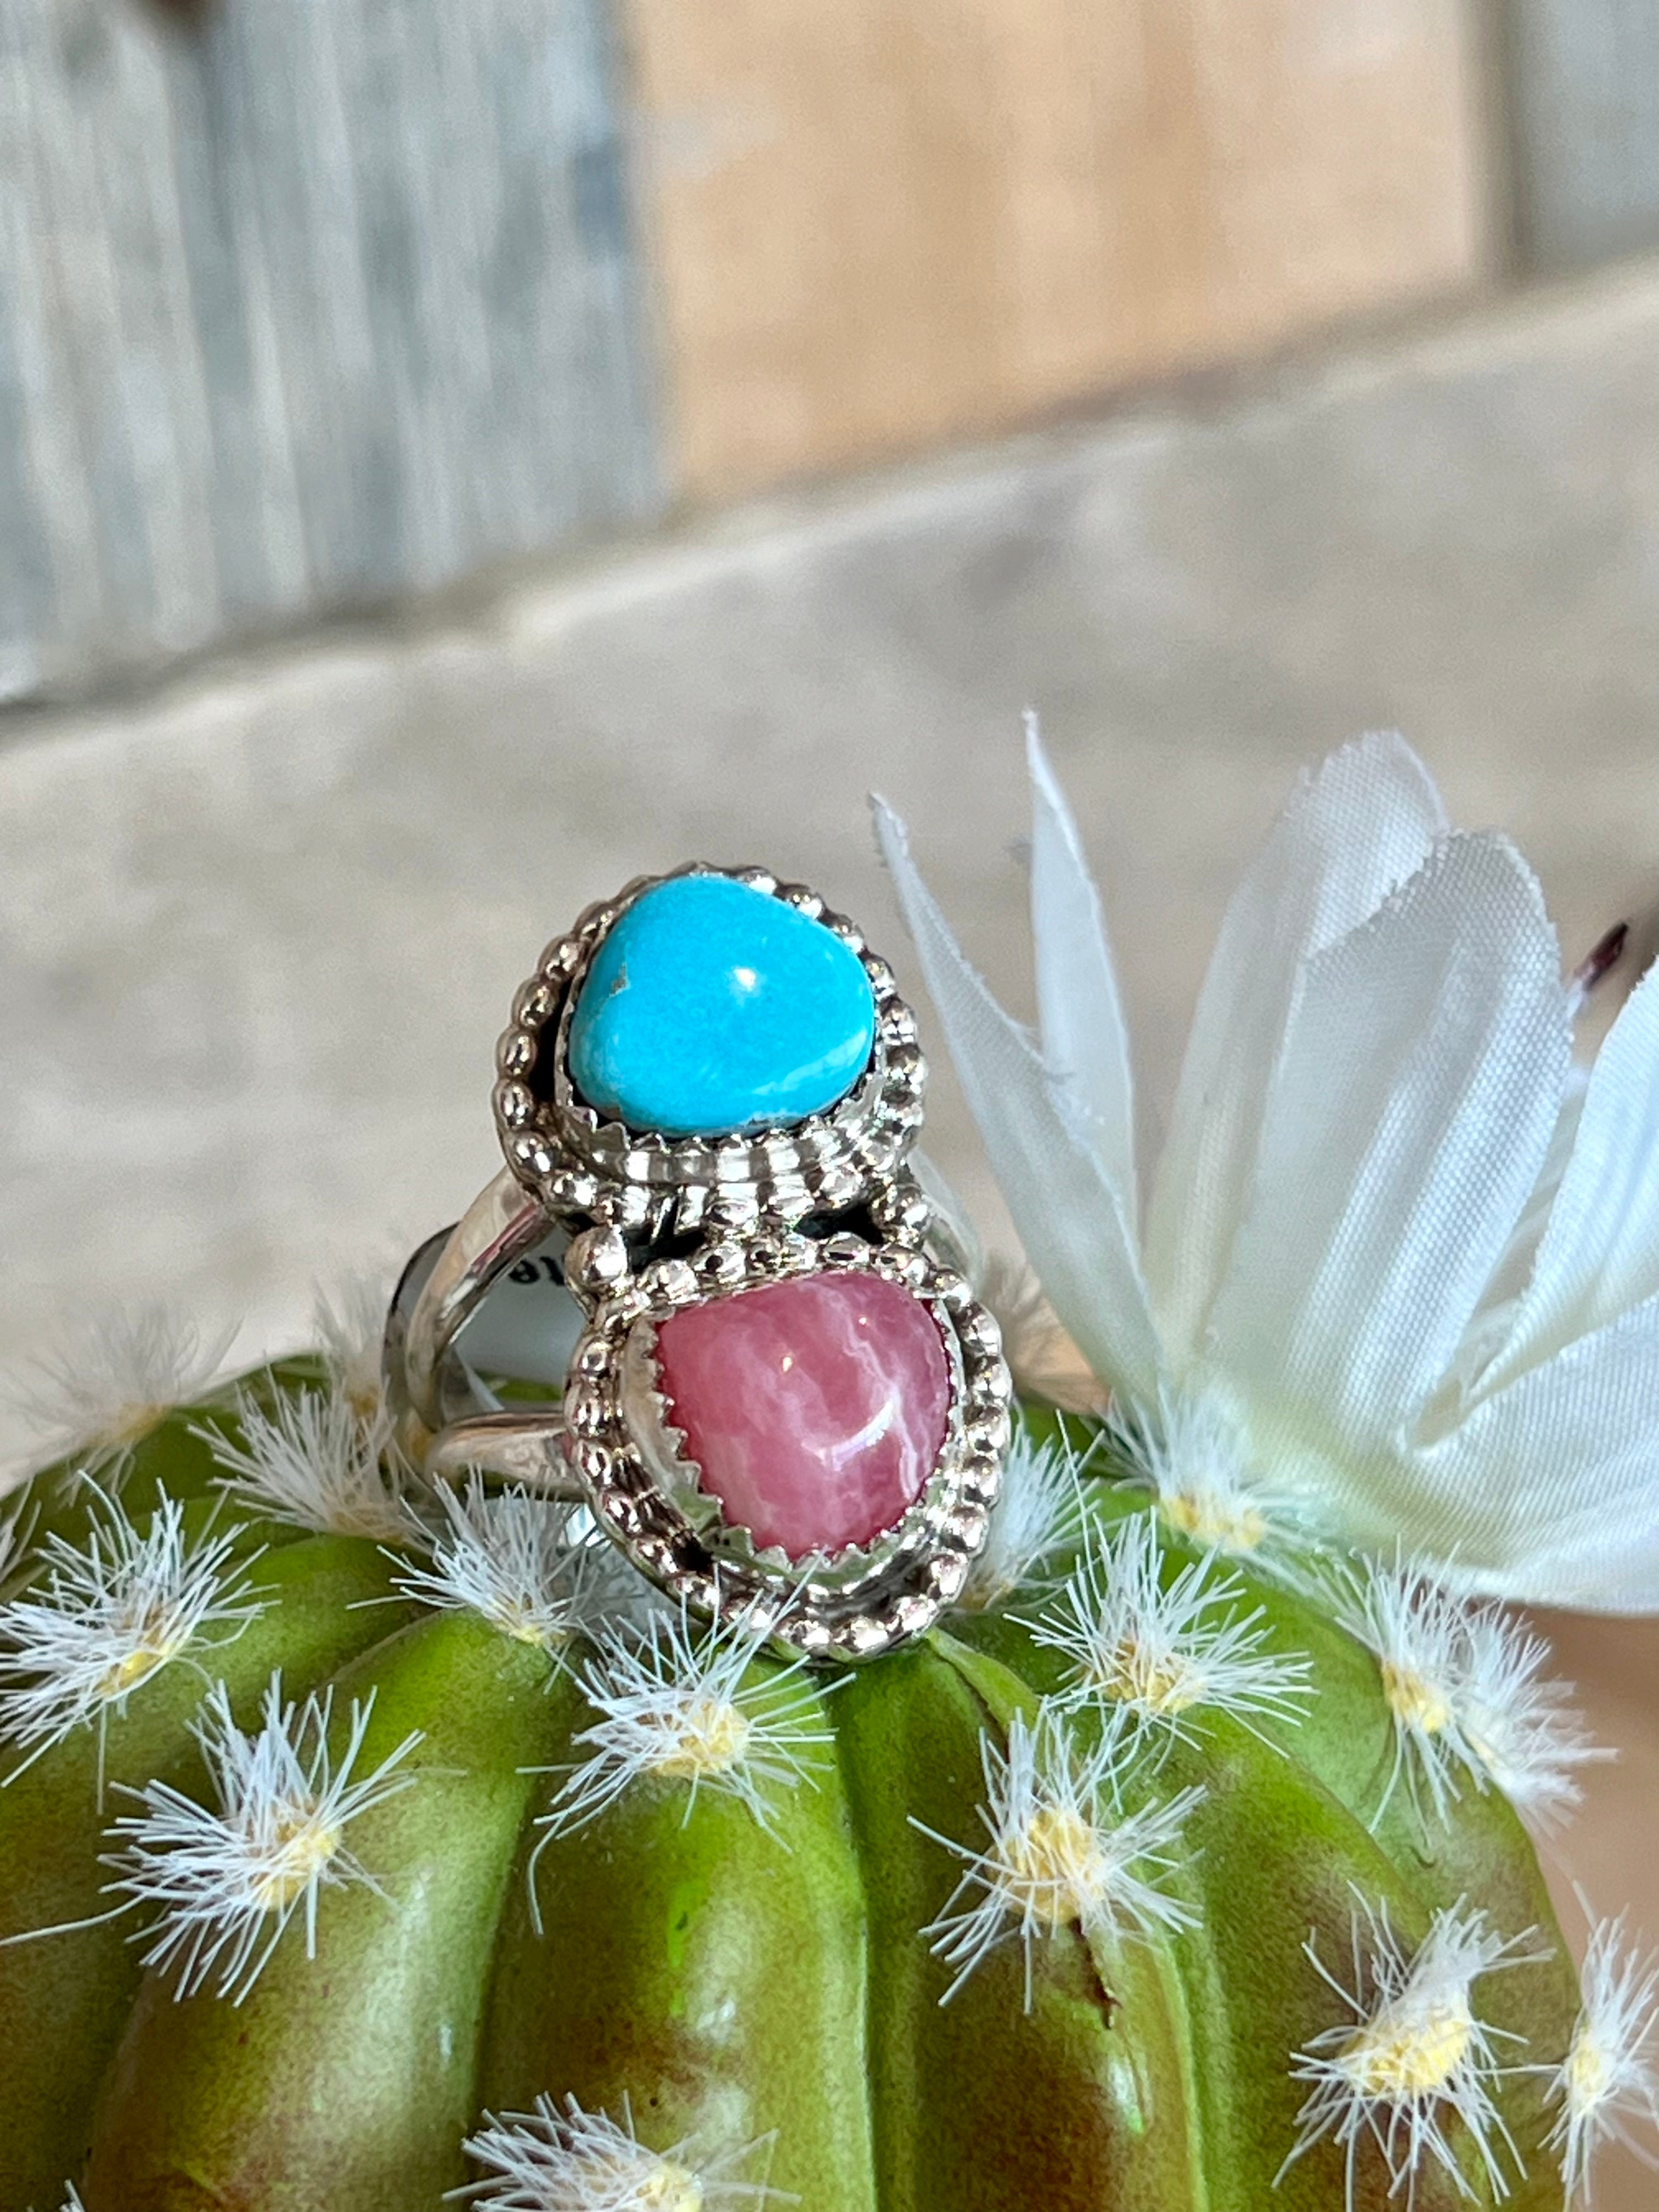 Double Trouble Turquoise Sterling Silver Ring